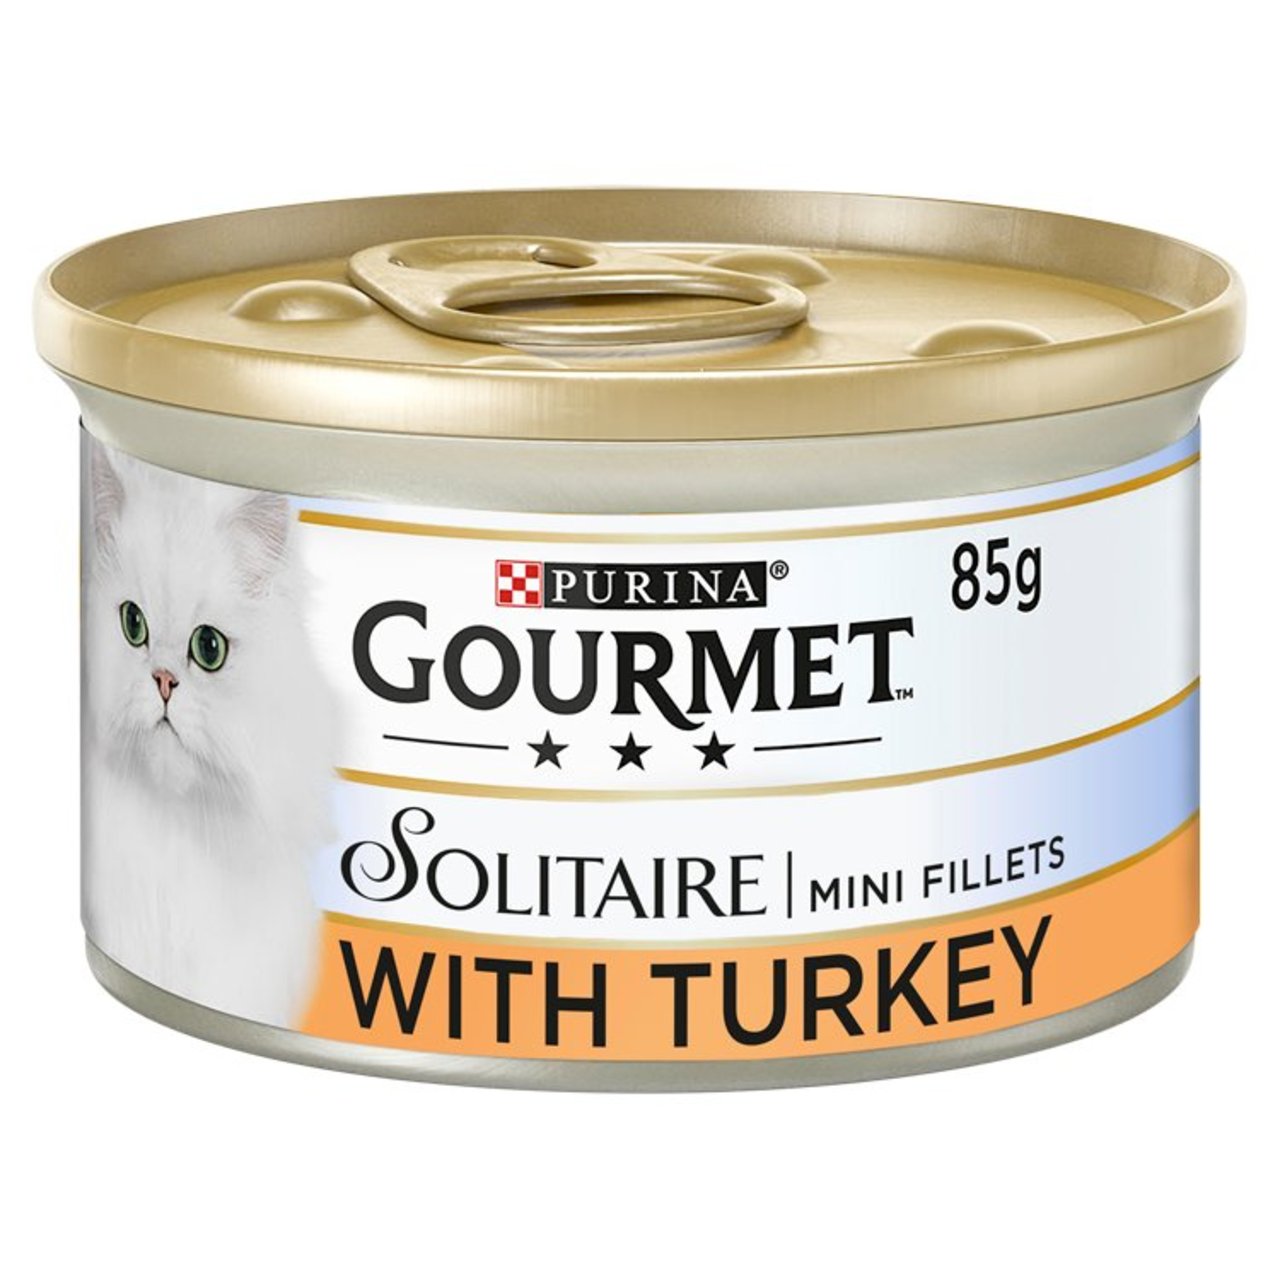 An image of Gourmet Solitaire Turkey in Sauce